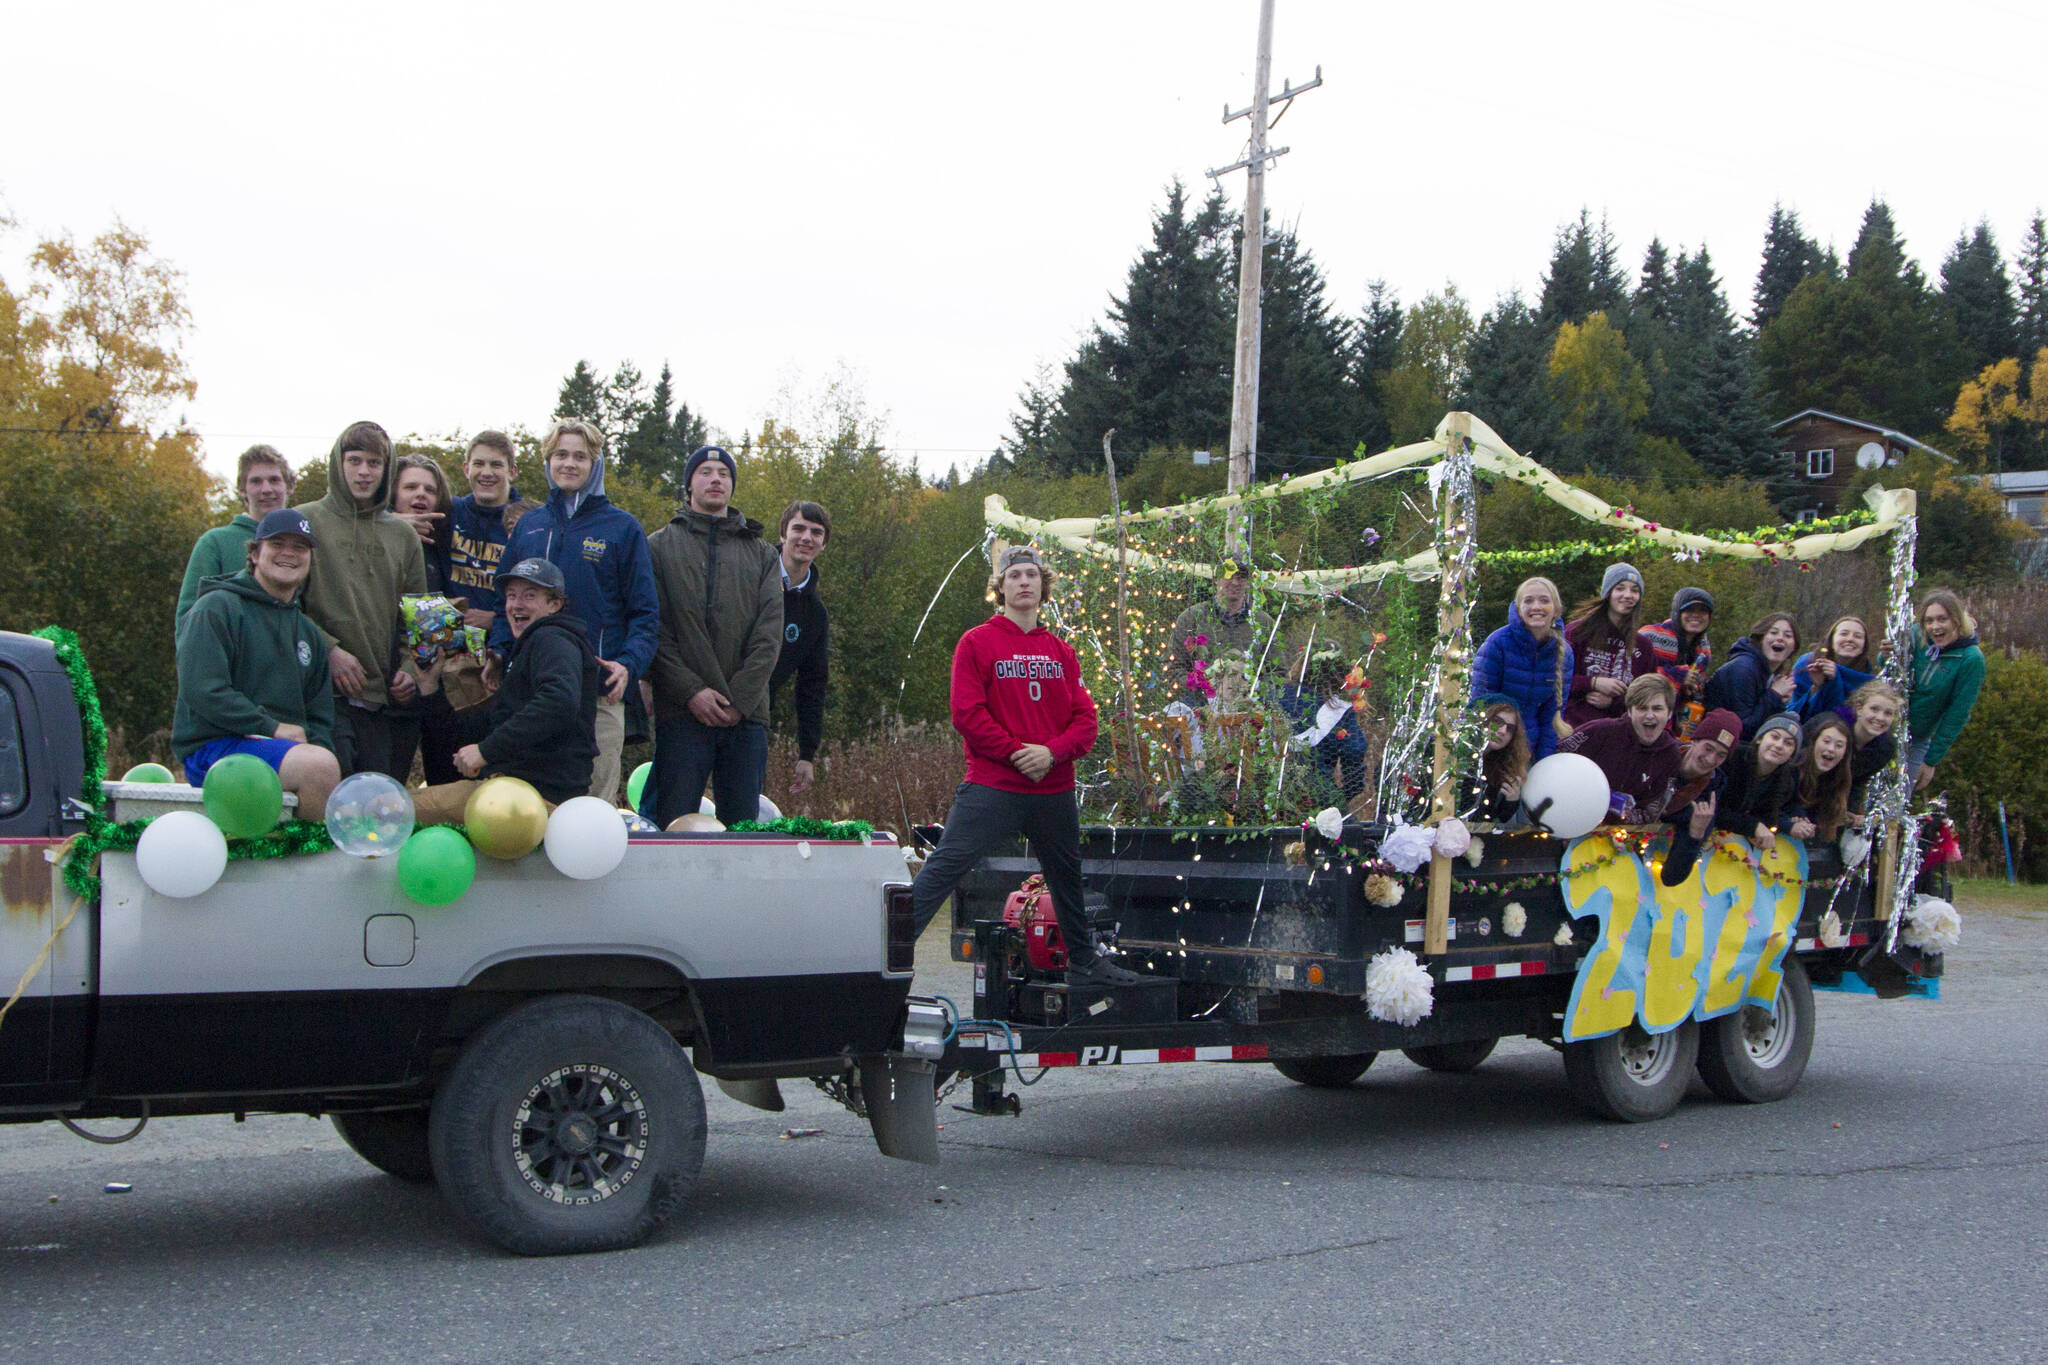 The Homer High School senior class proudly shows off their float for the Homecoming Parade. (Photo by Sarah Knapp/Homer News)